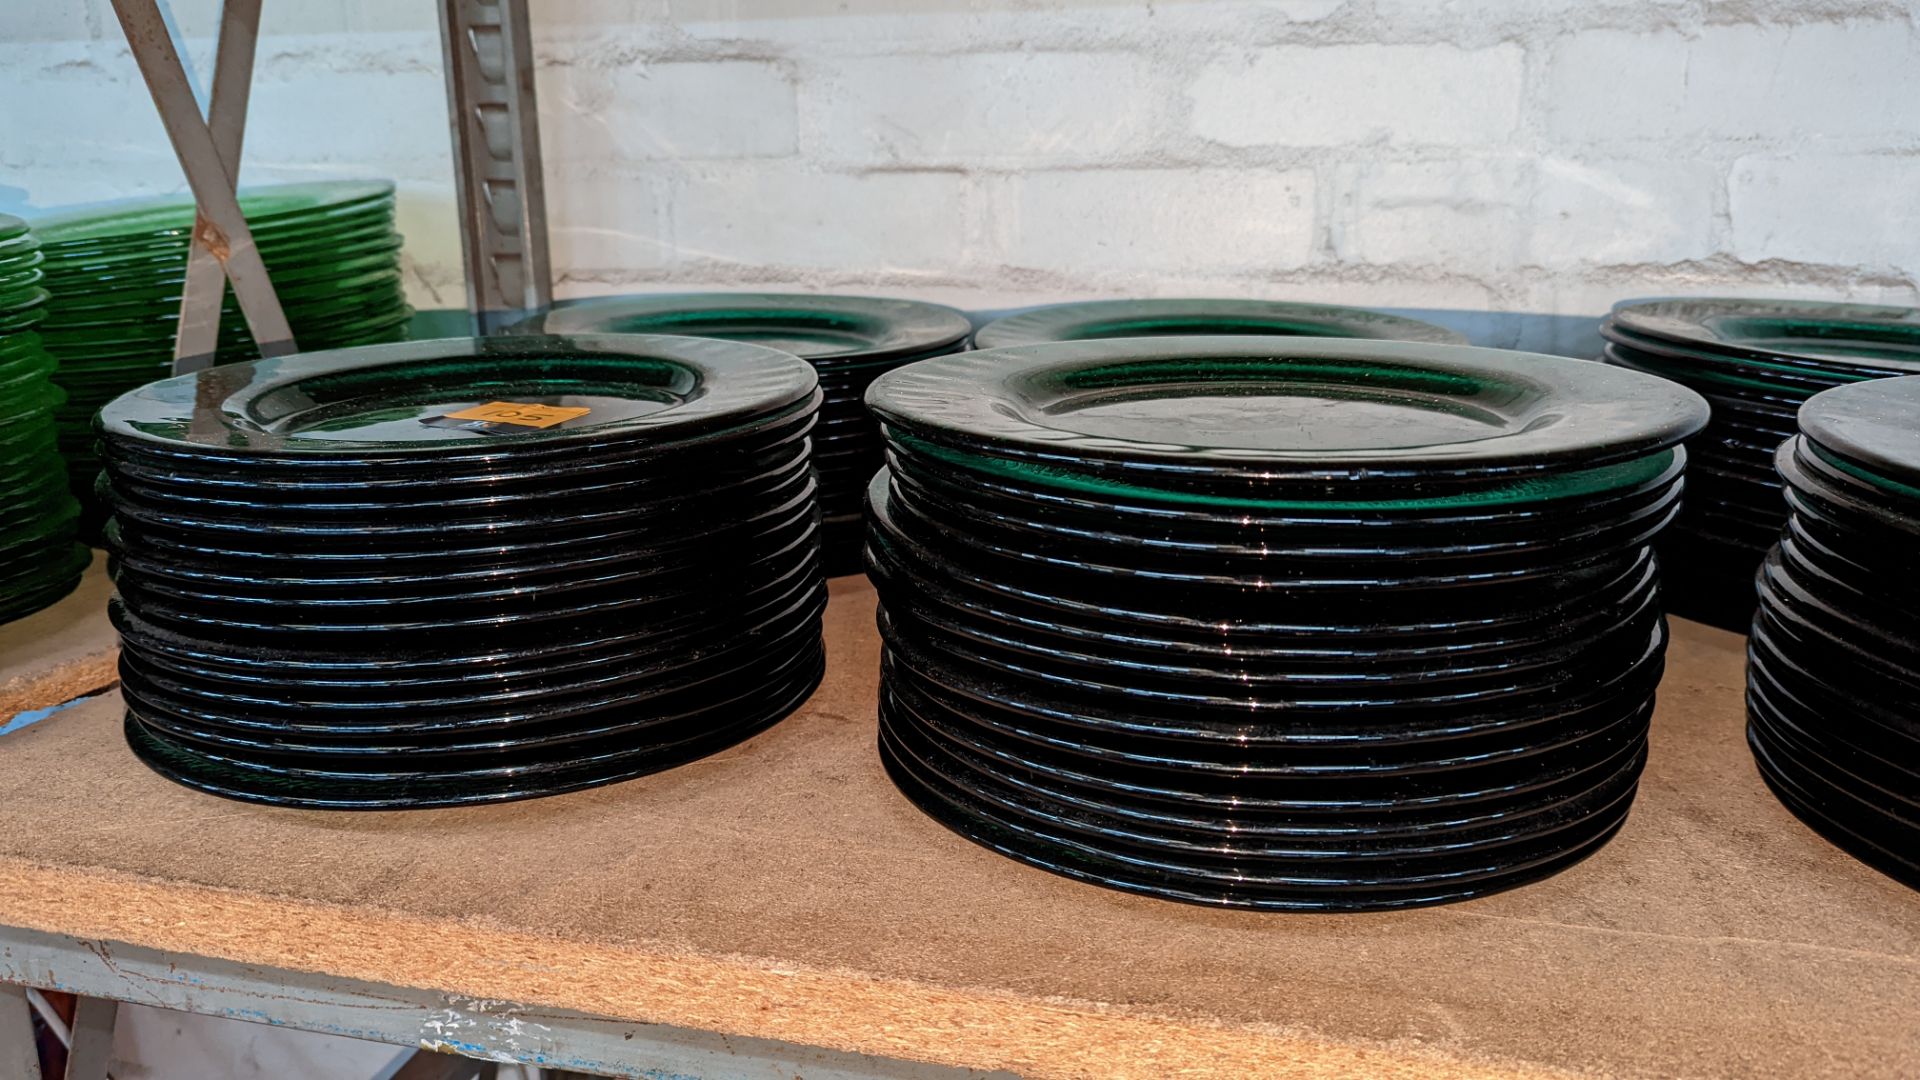 60 off dark green glass plates each measuring approximately 27cm diameter - Image 2 of 3